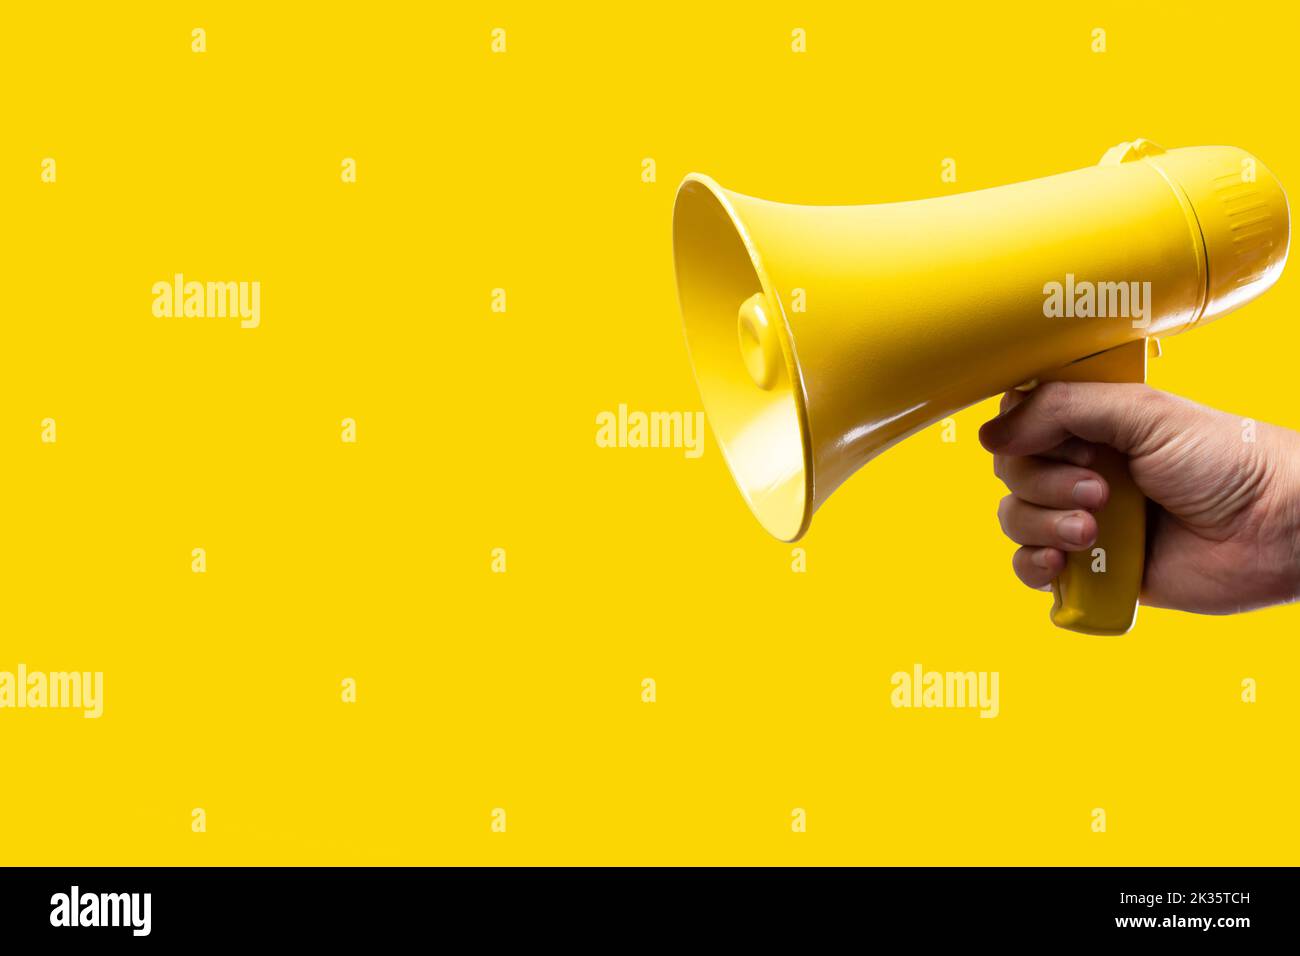 A man's hand holds a yellow megaphone on a bright yellow background. Rumors, fakes, agitation, propaganda, election debates, journalism, media, busine Stock Photo